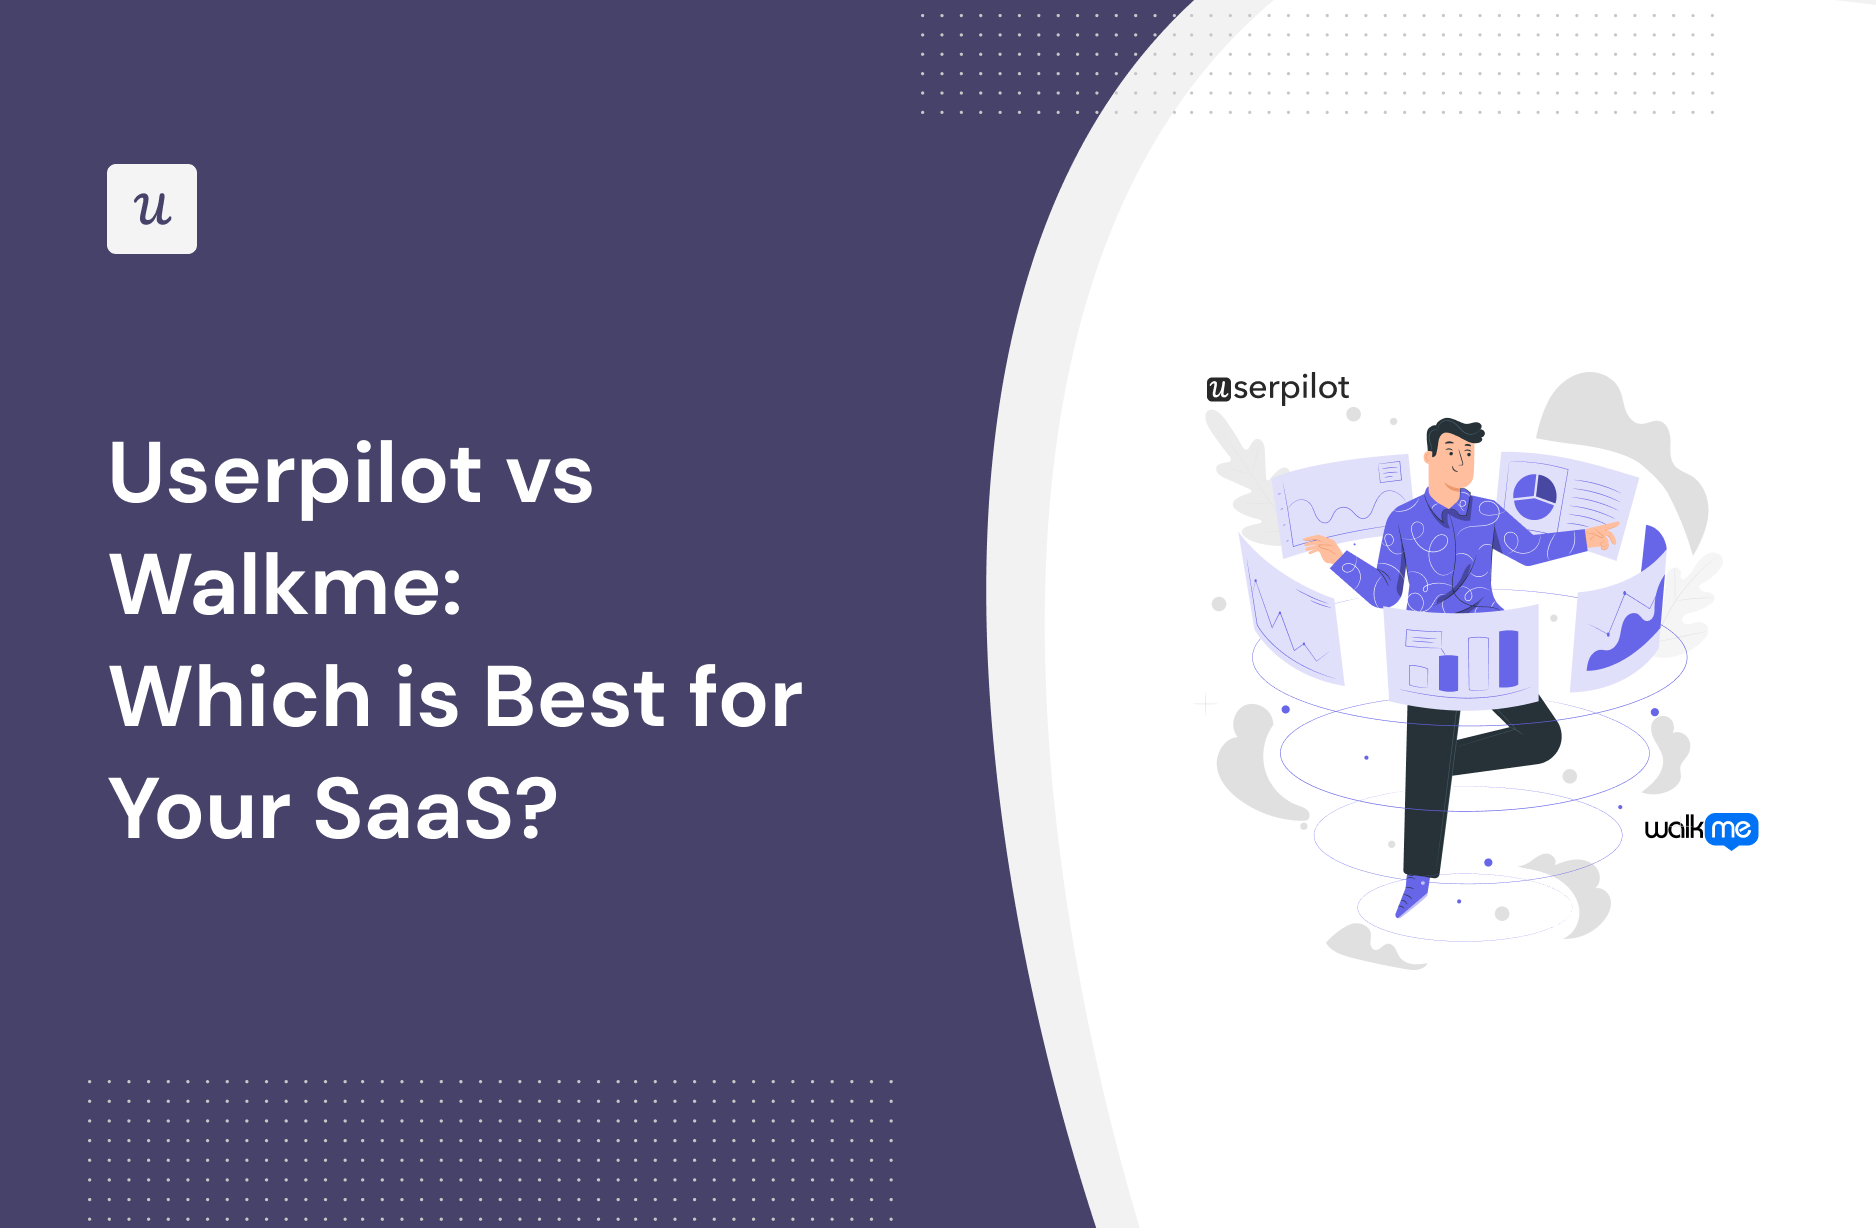 Userpilot vs Walkme: Which Is Best for Your SaaS?